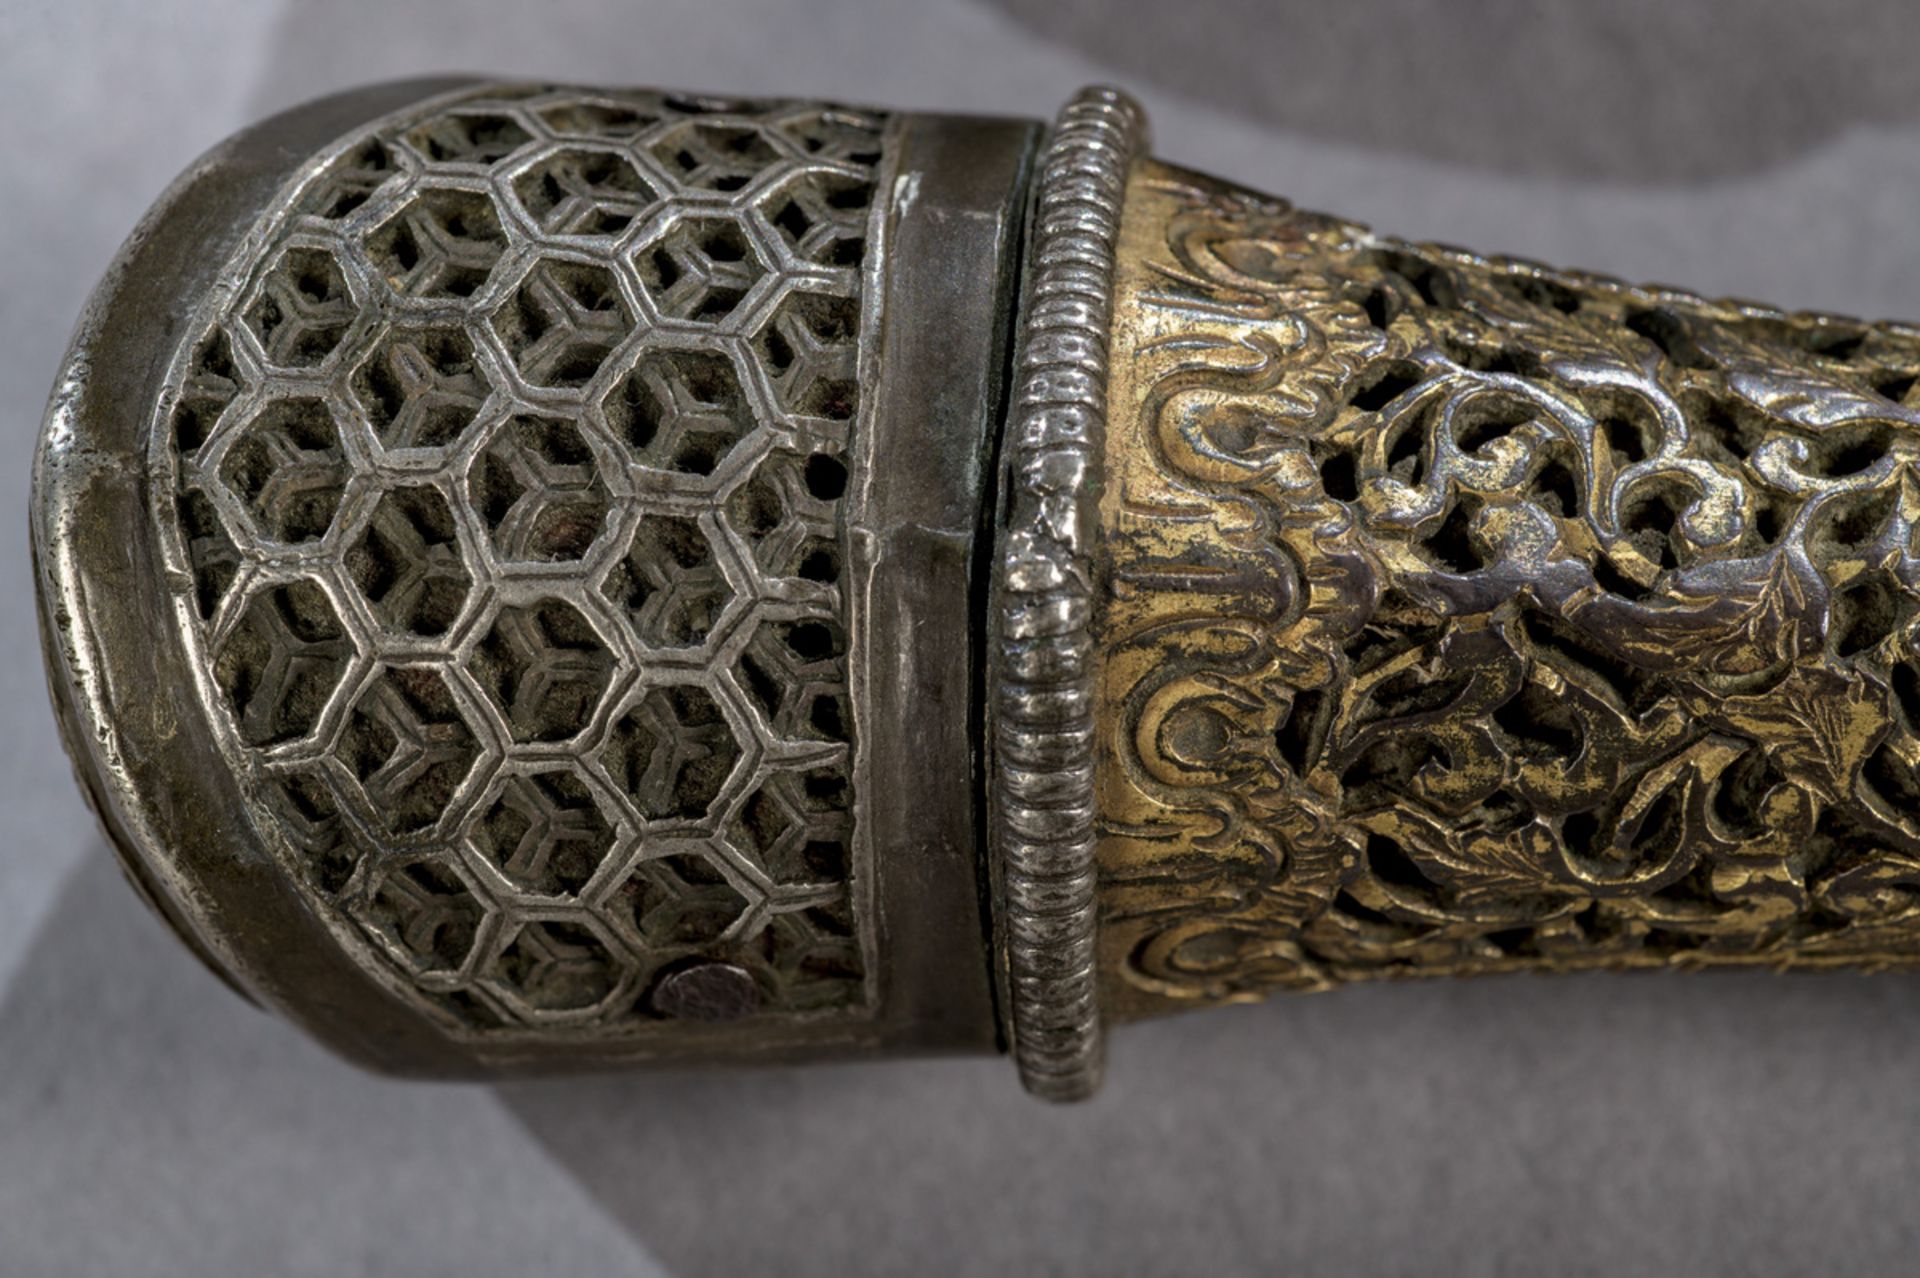 A dagger with openwork iron and gilt bronze decoration, Bhutan 18th - 19th century (tot 46.5 cm) - Image 4 of 7